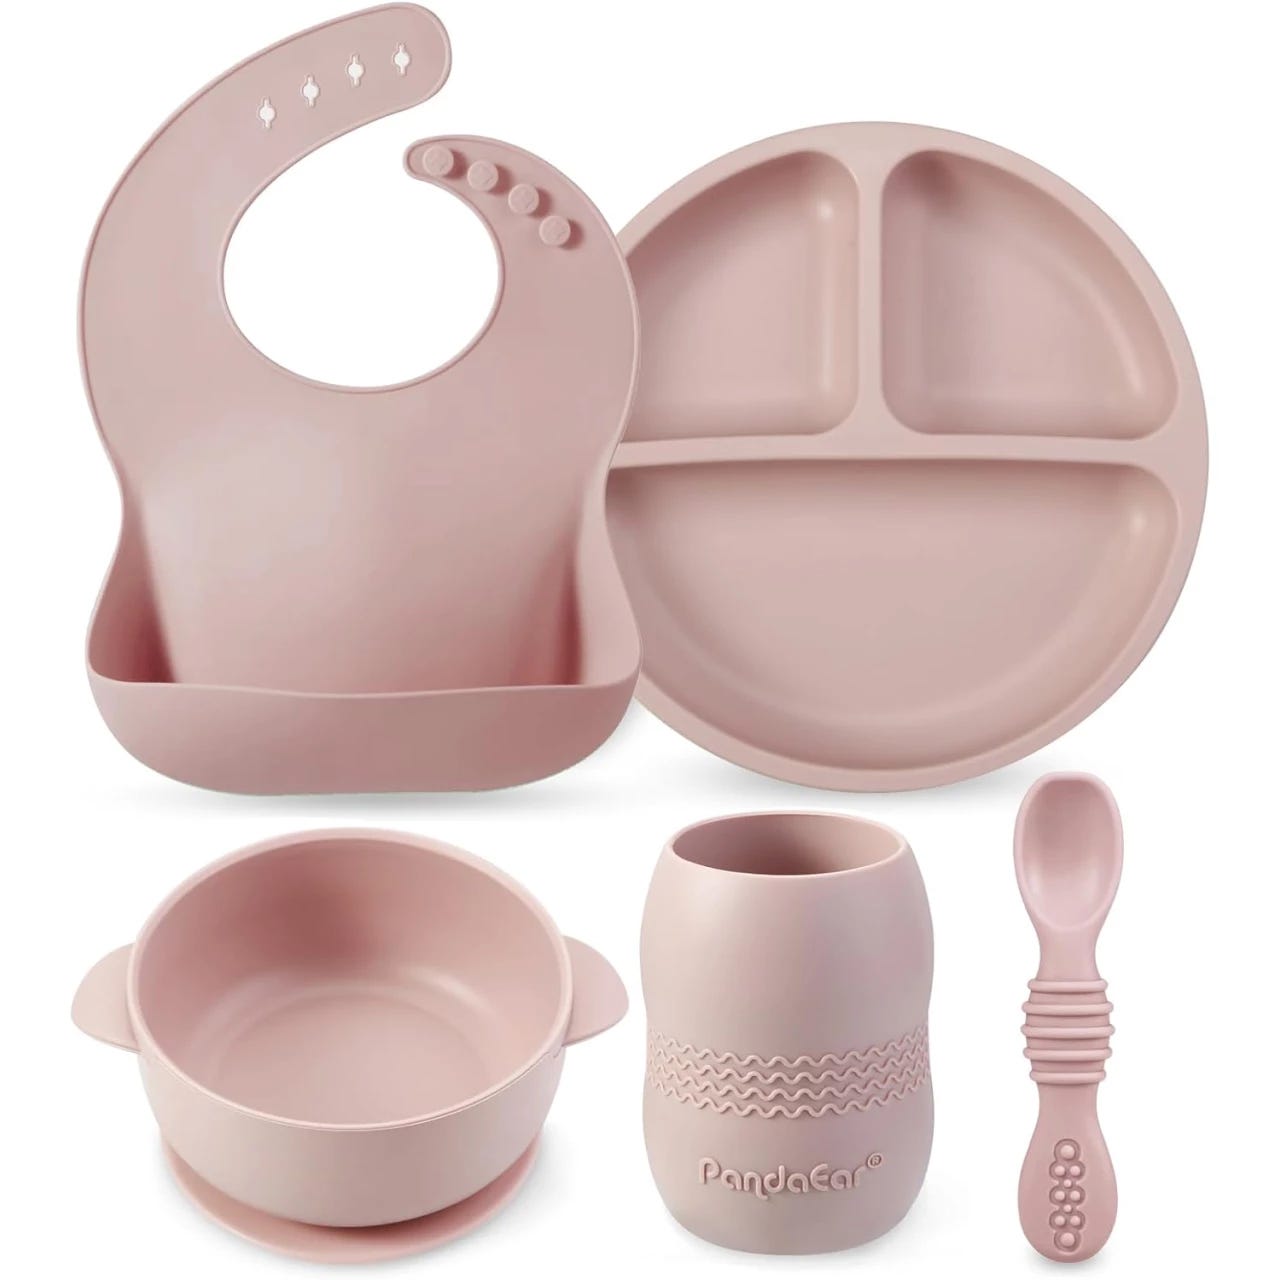 15 Best Baby Bowls And Plates For Your Little Ones In 2023